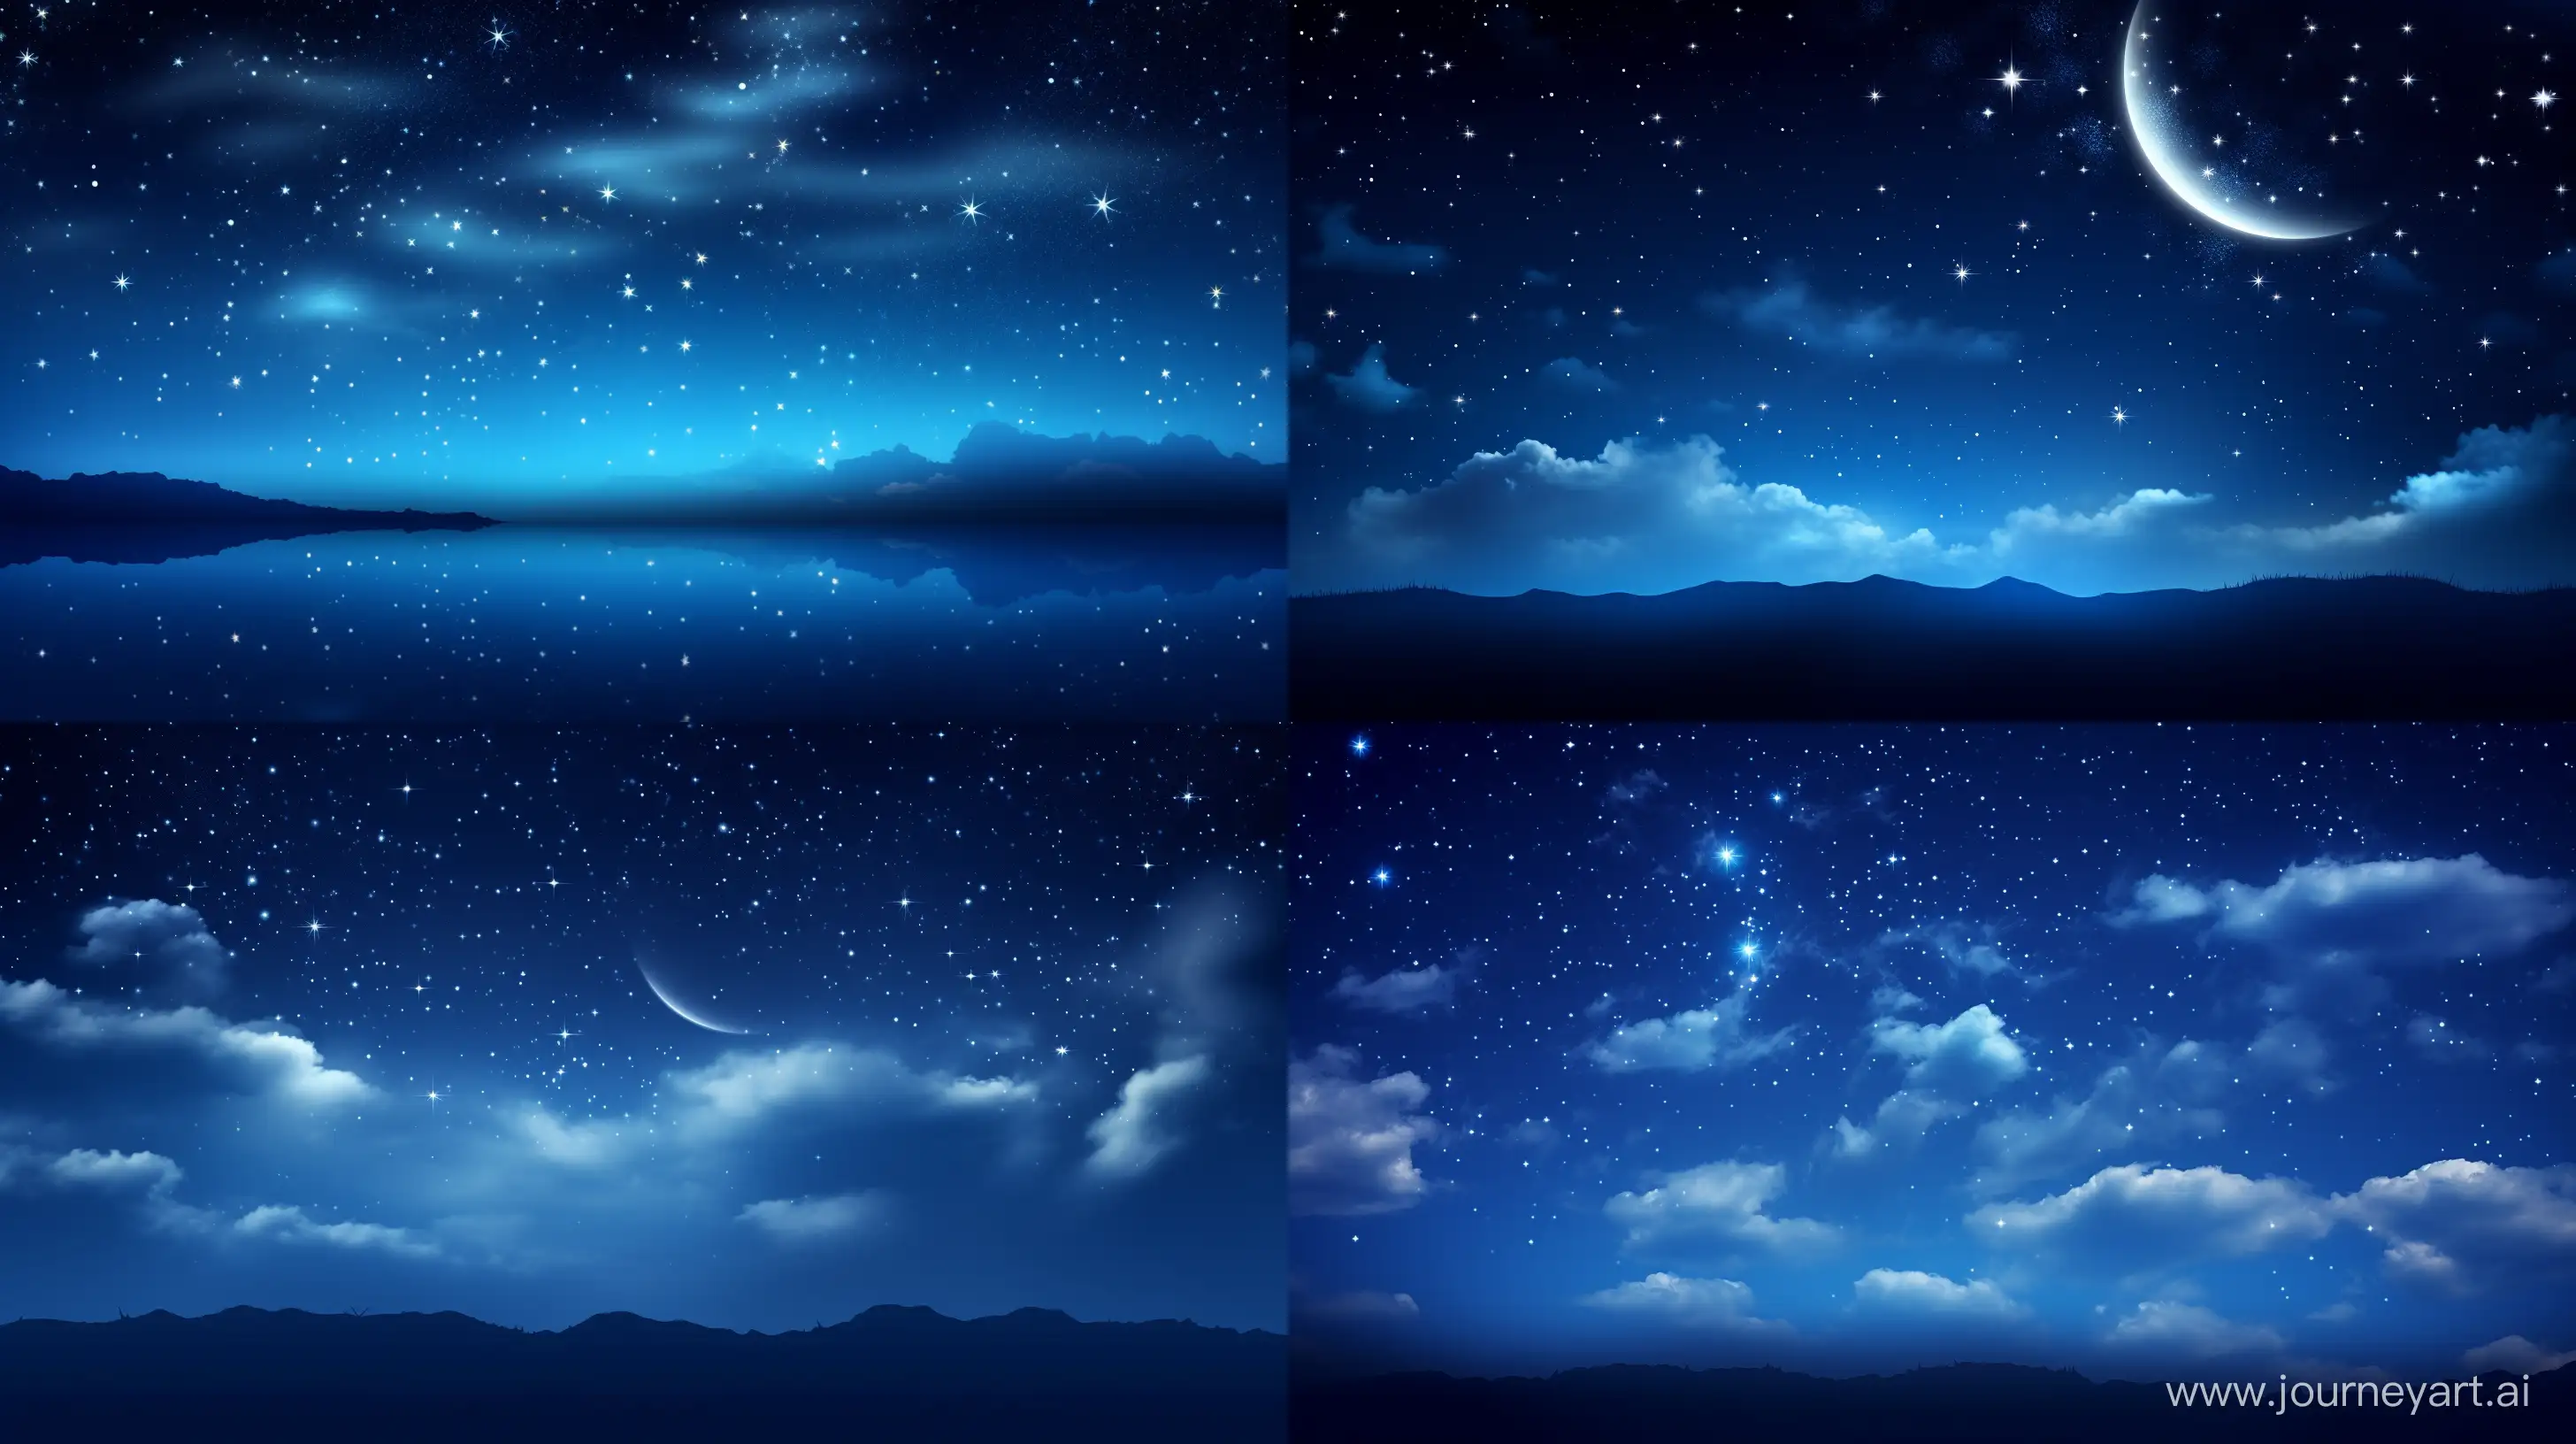 The navy blue sky enveloped the world like a mysterious veil. In the distance, the crescent-shaped moon, shining within the black canvas, only became discernible with a gentle glow. The deep tones of navy highlighted the twinkle of stars in the sky, while the crescent moon's elegant silhouette shimmered like a pearl on the distant horizon. This scene was a tableau reflecting the tranquil silence of the night and the enigma of nature in the sky. realistic photo,cinematic lighting --ar 16:9